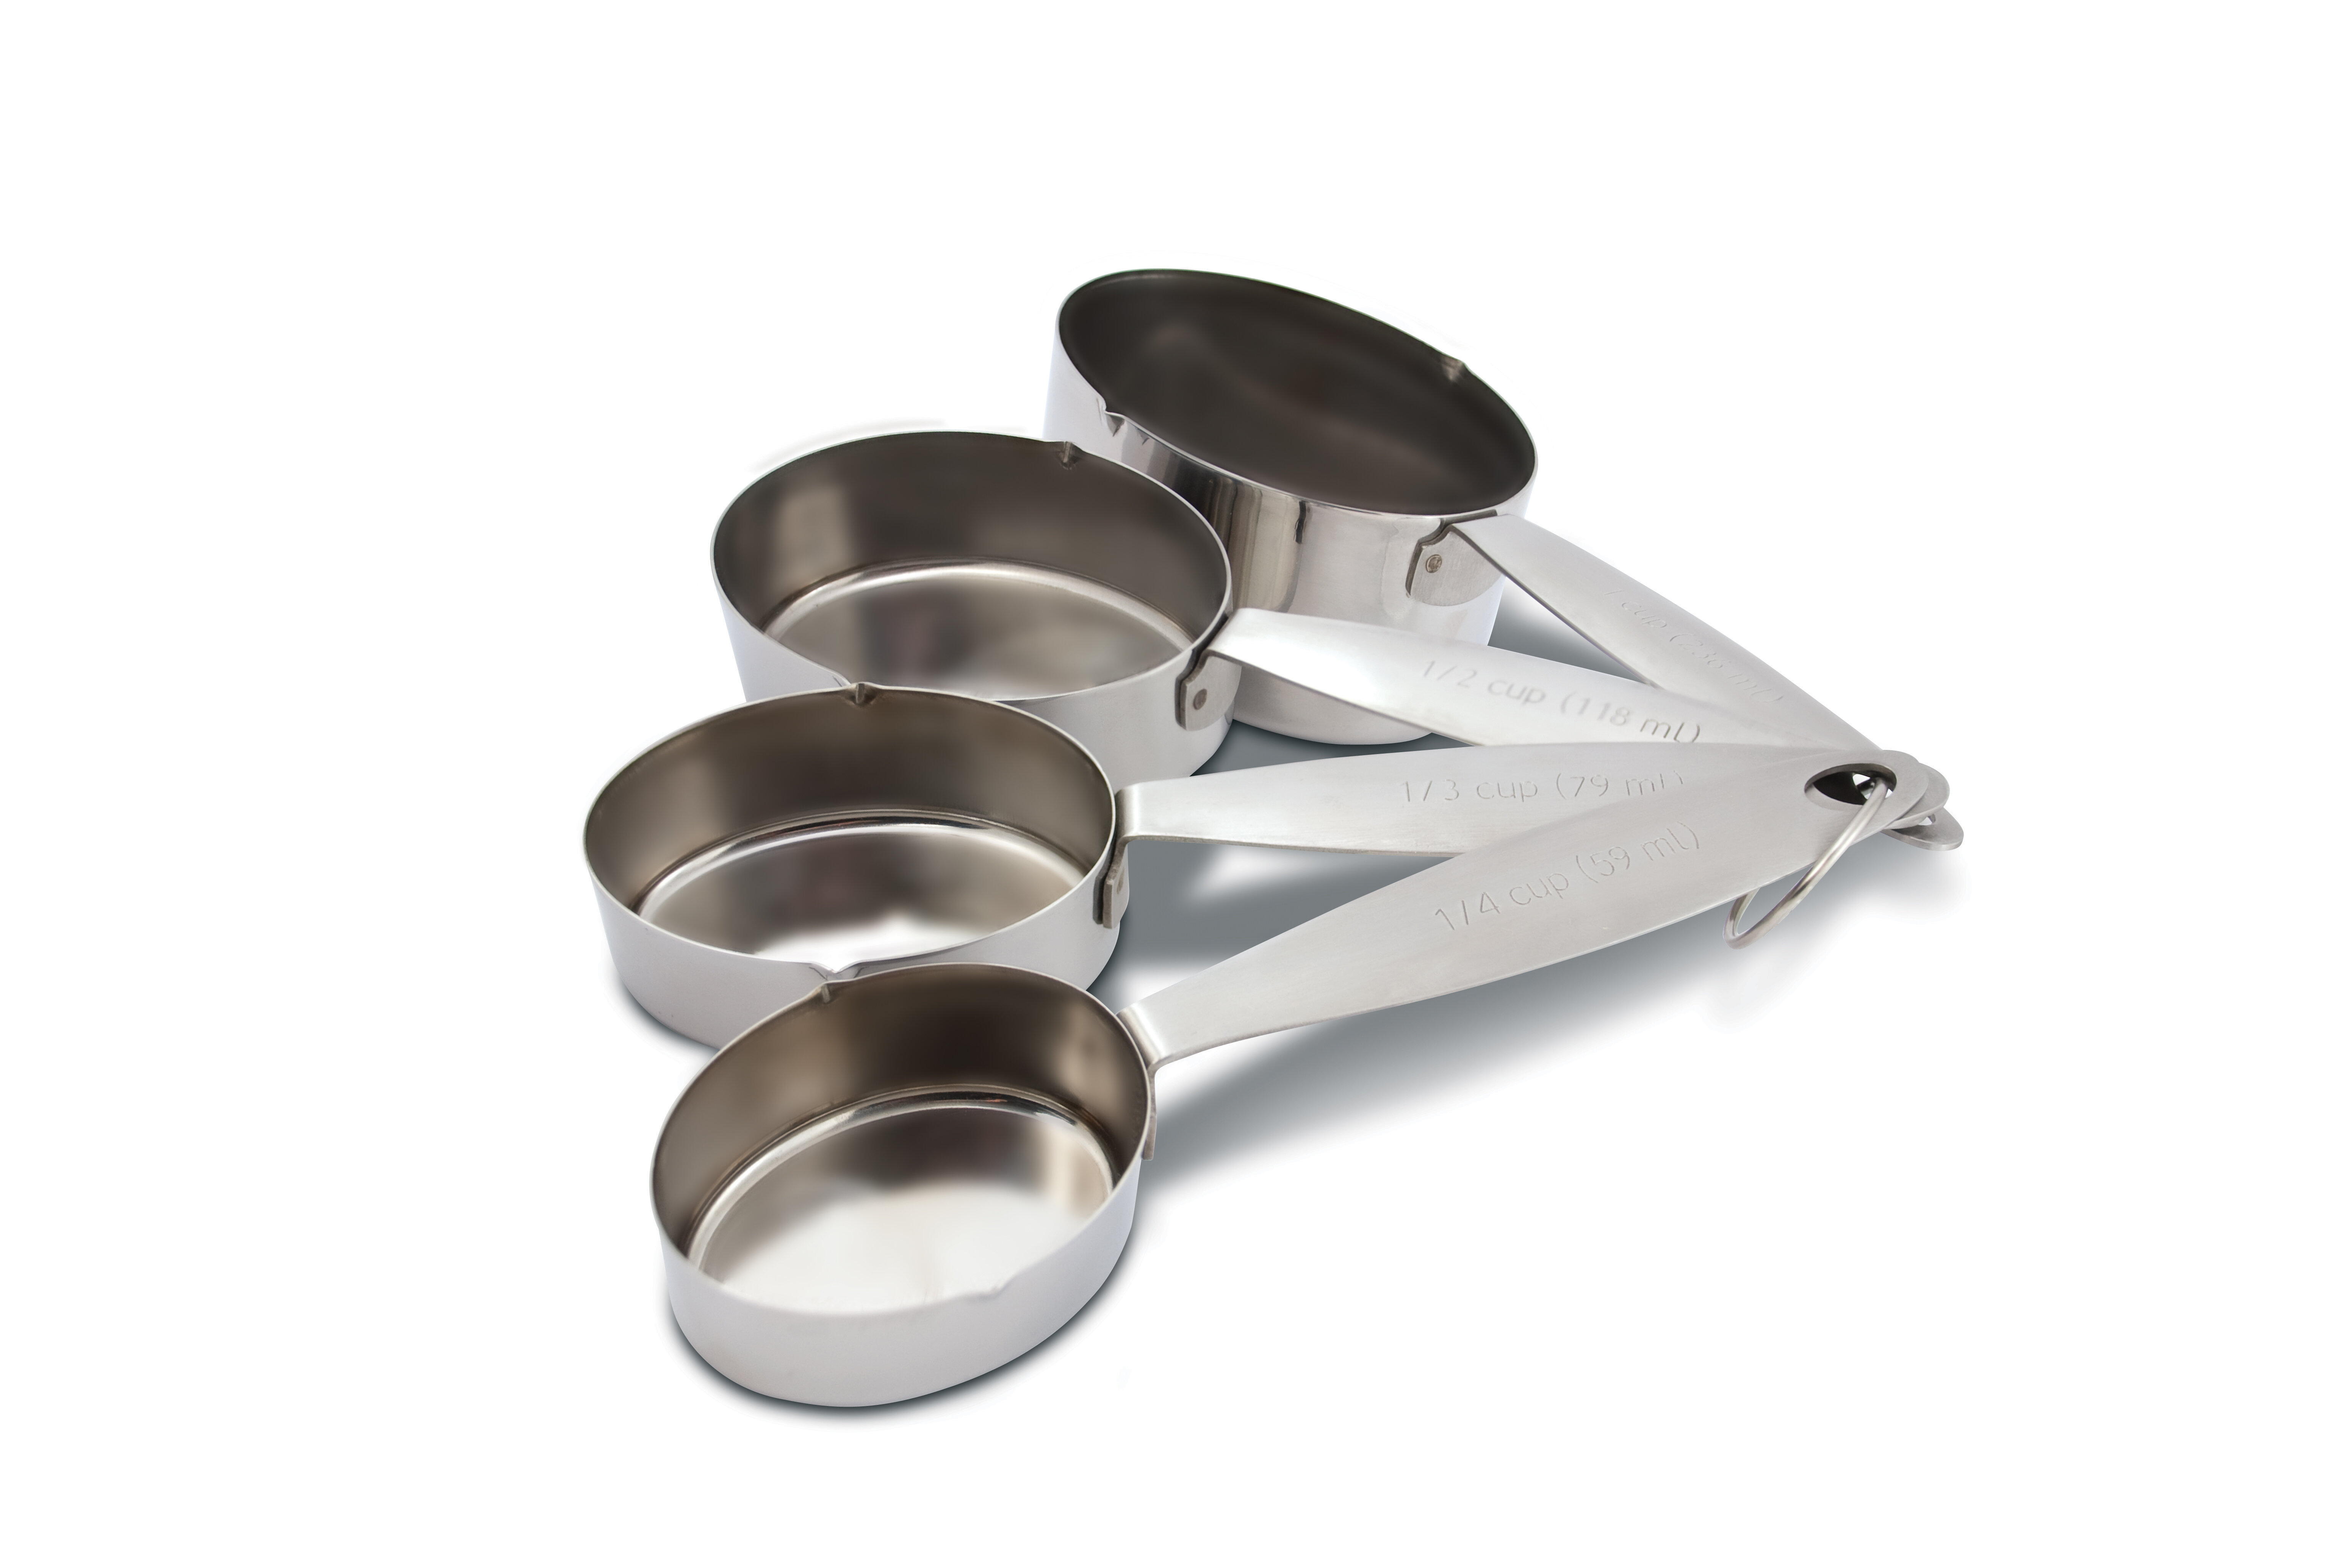 Amco Stainless Steel Measuring Cups Set of 4 